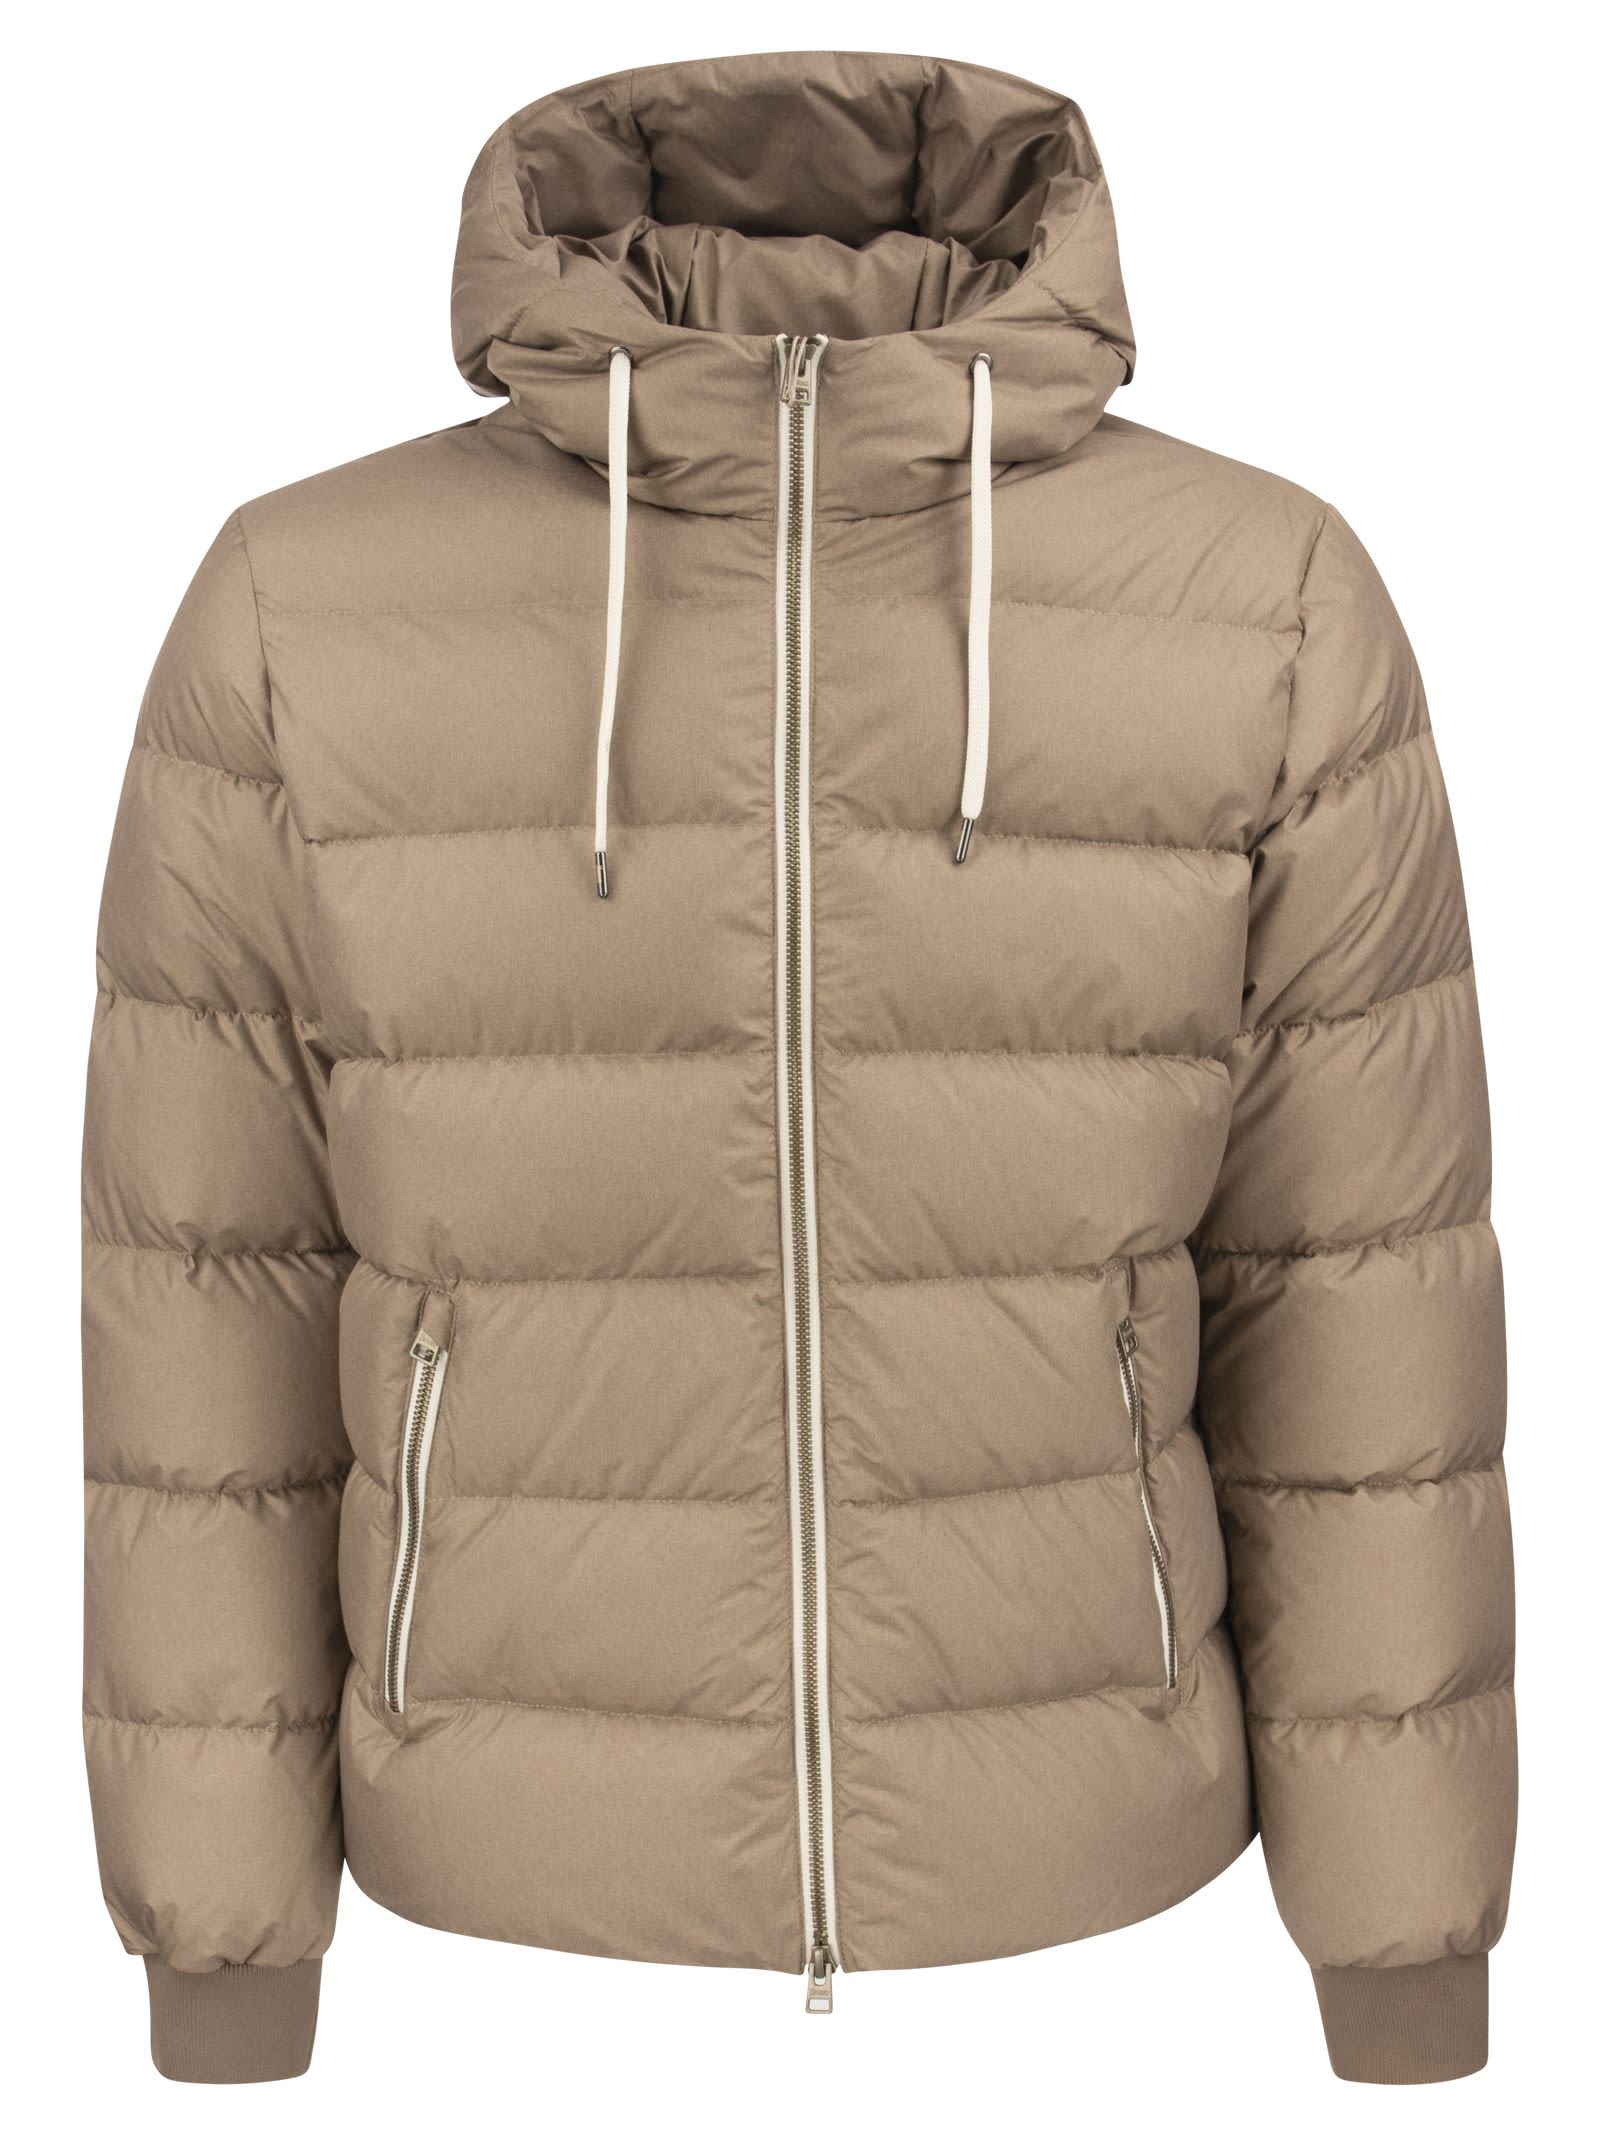 HERNO HOODED DOWN JACKET